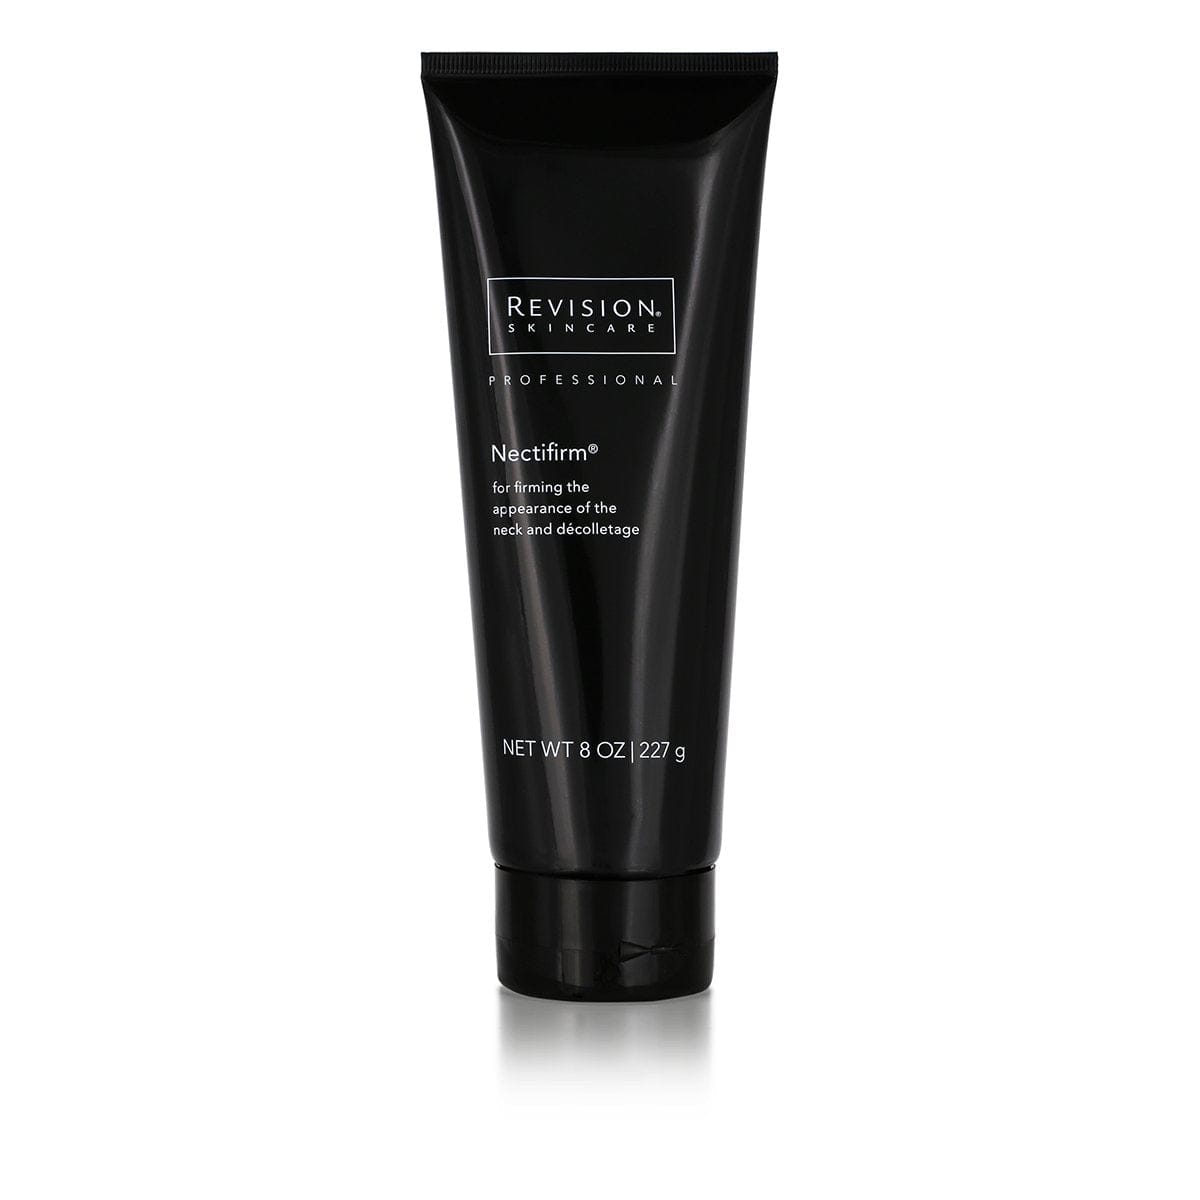 Nectifirm Pro Size- for firming the appearance of the neck and décolletage. Tube Front